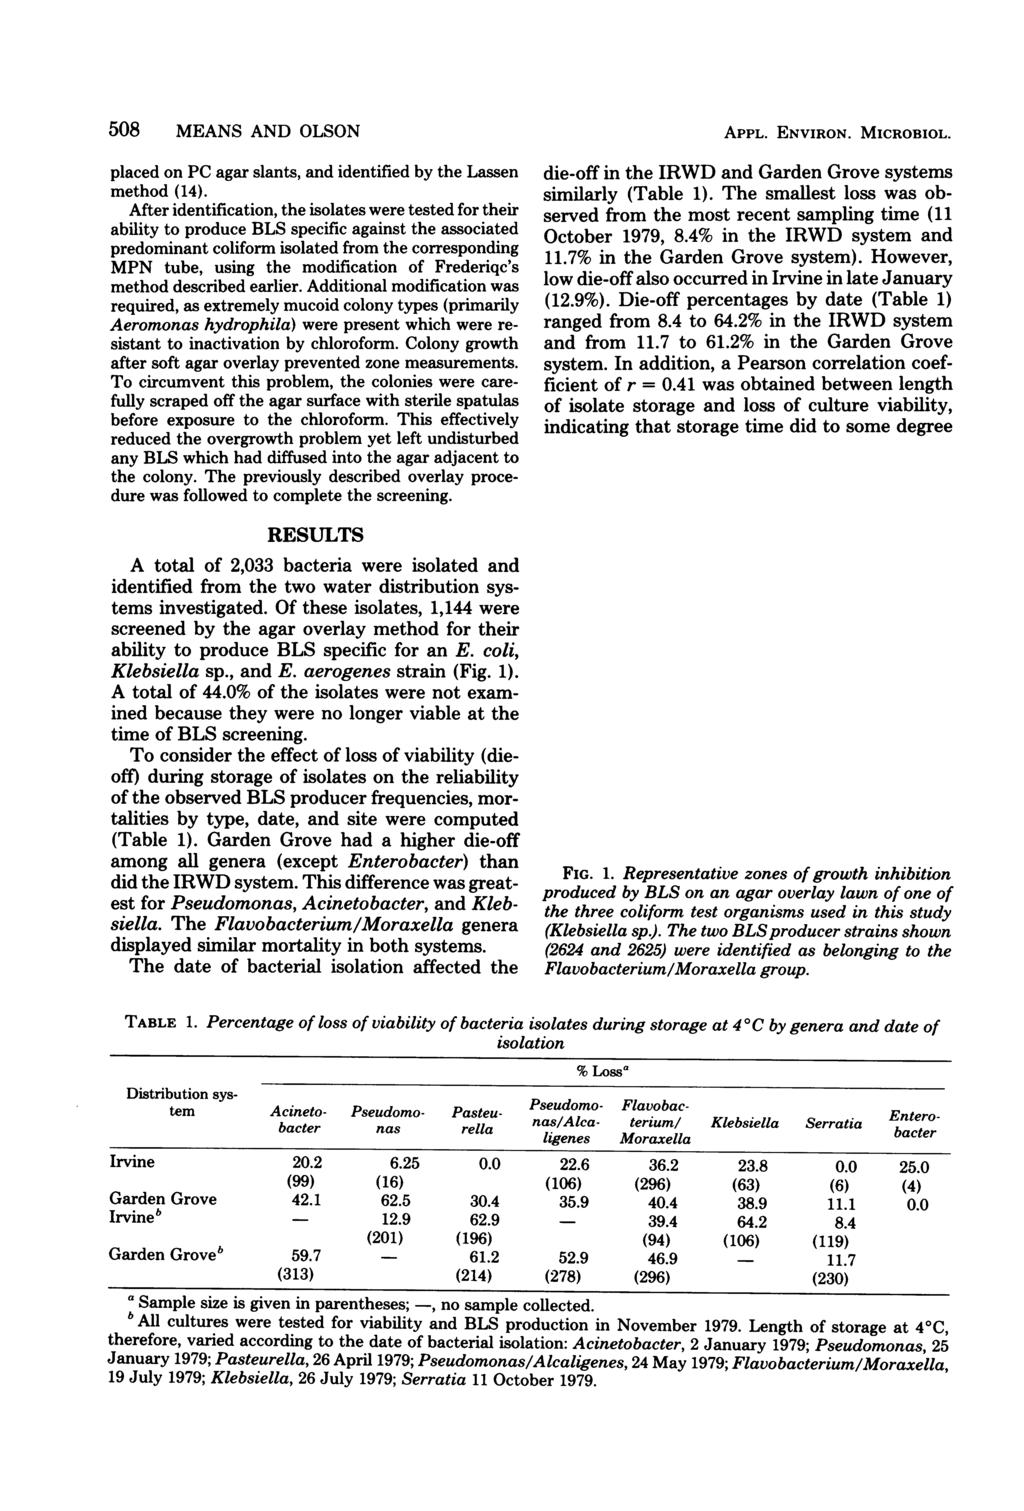 508 MEANS AND OLSON placed on PC agar slants, and identified by the Lassen method (14).